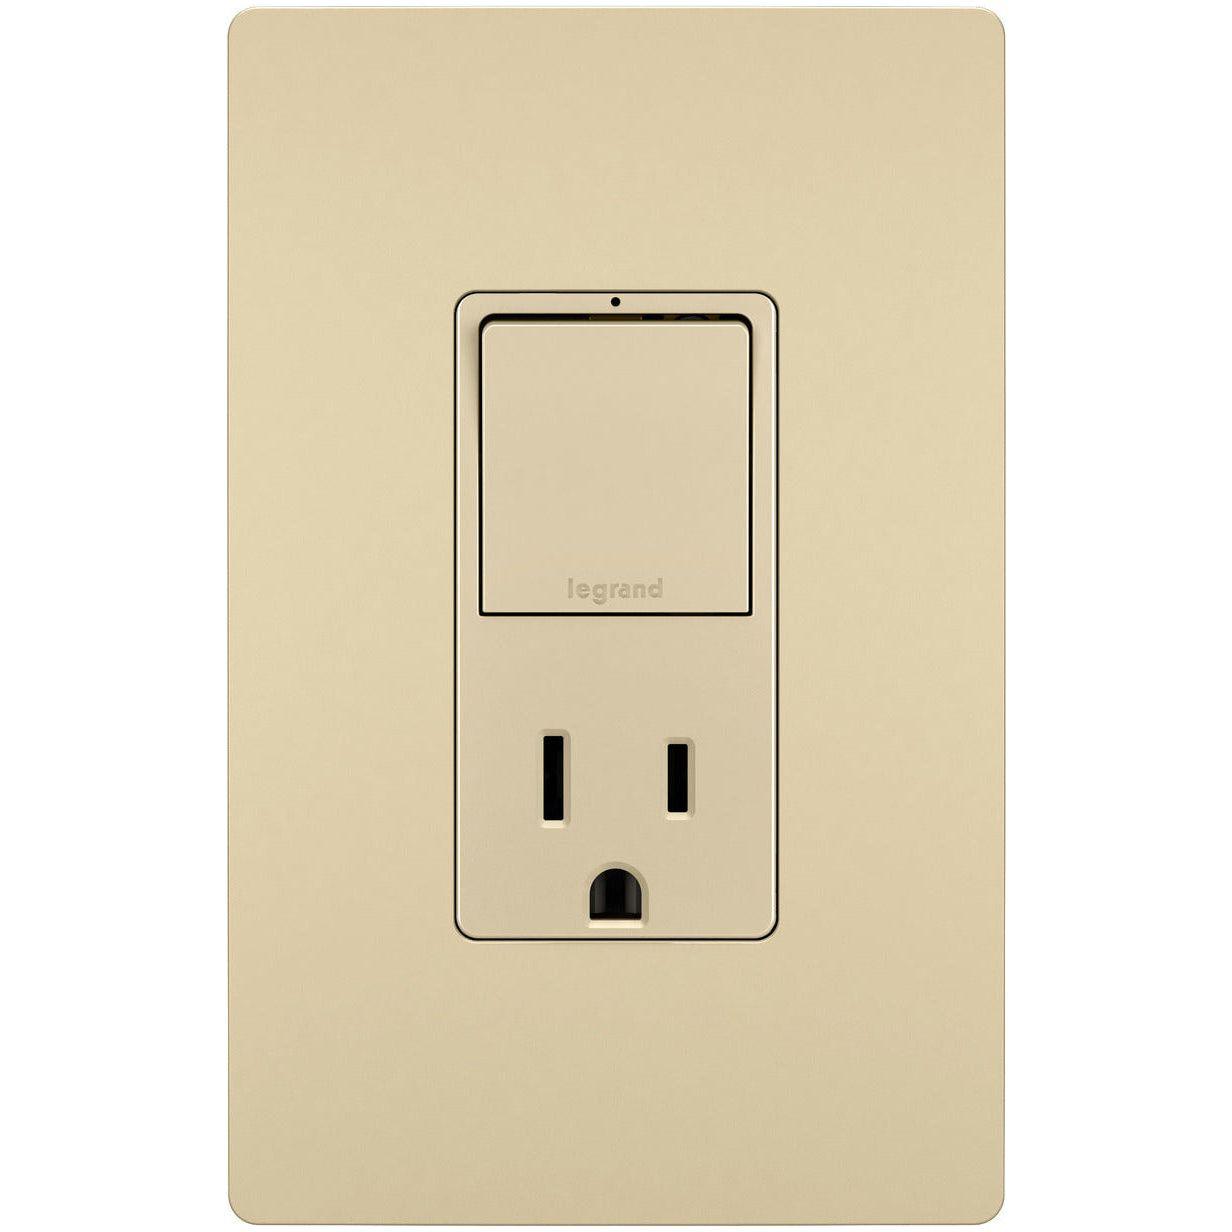 Legrand - radiant Single-Pole/3-Way Switch with 15A Tamper-Resistant Outlet - Lights Canada